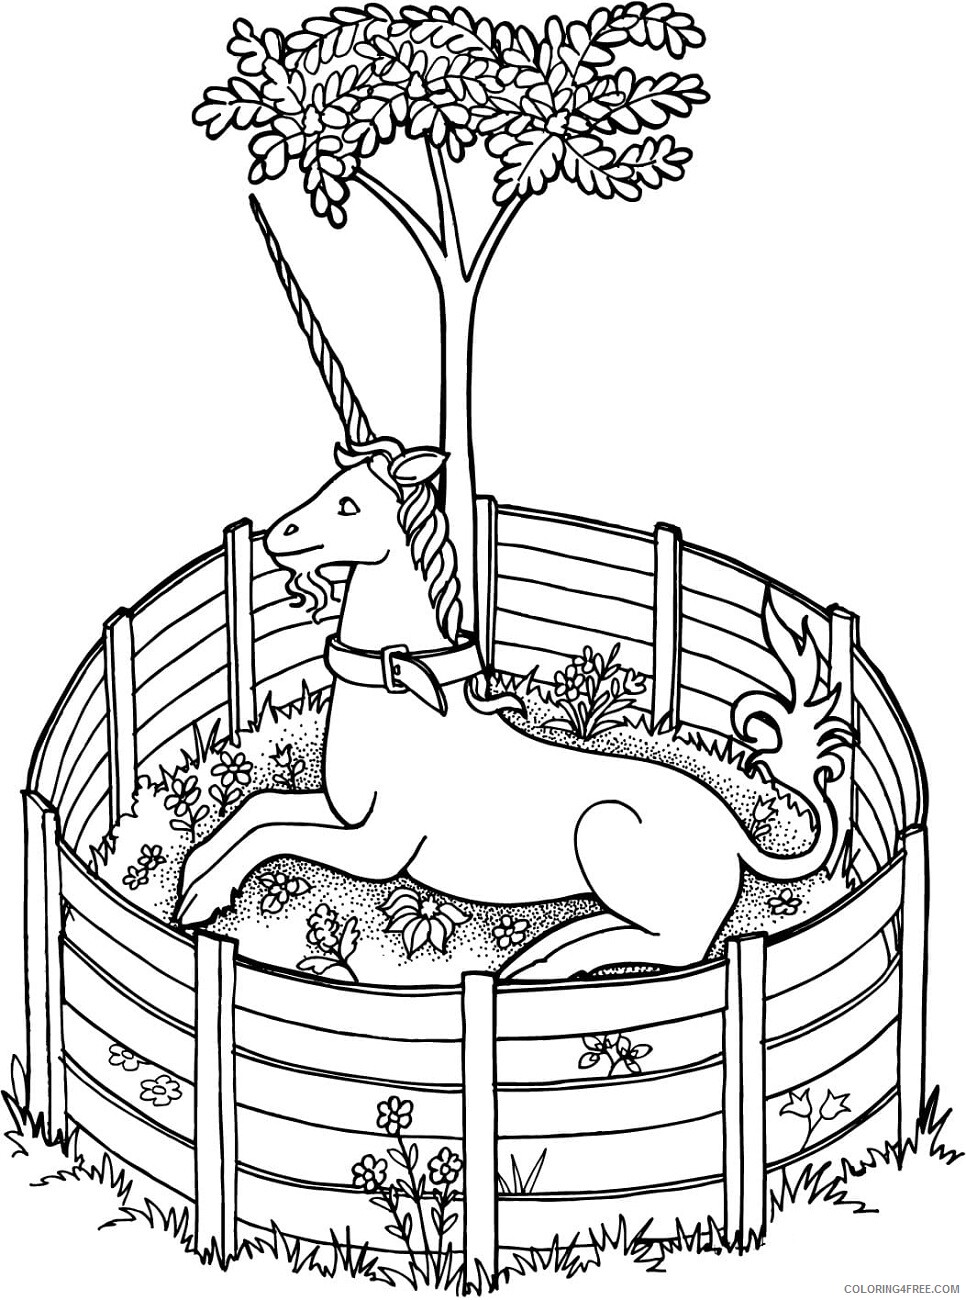 Unicorn Coloring Pages unicorn_in_cage Printable 2021 6058 Coloring4free